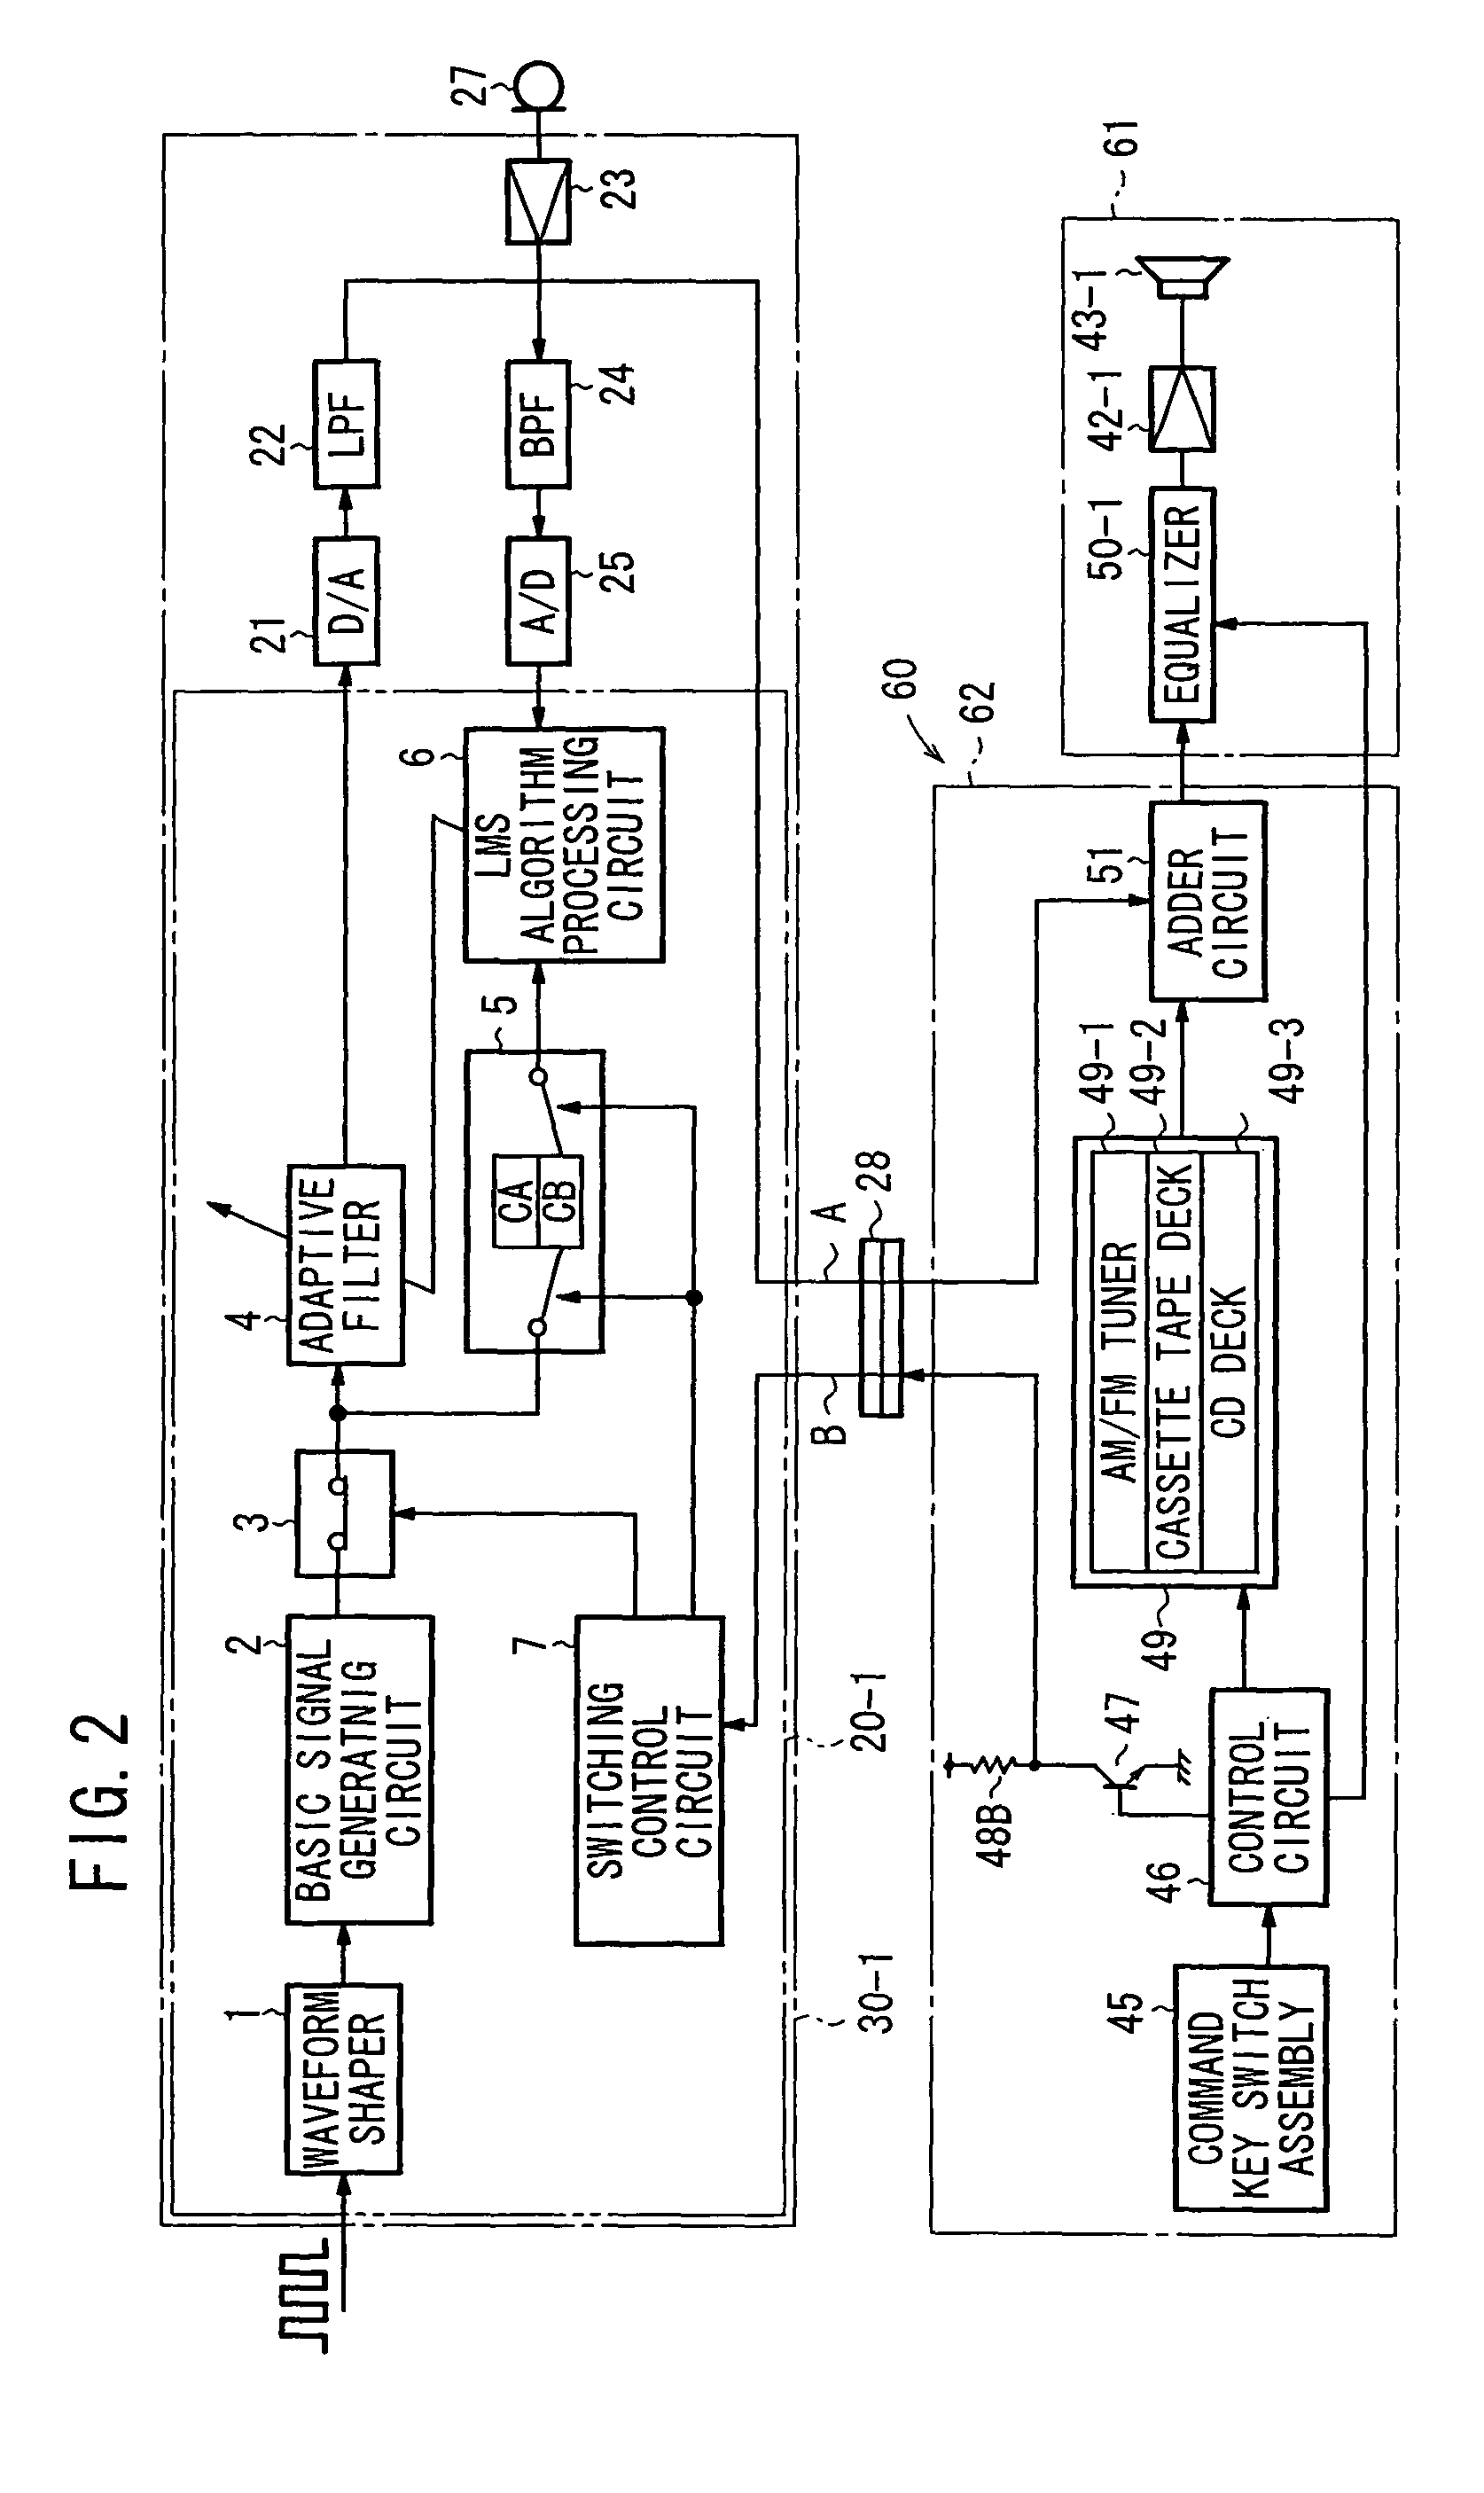 Active vibratory noise control apparatus matching characteristics of audio devices